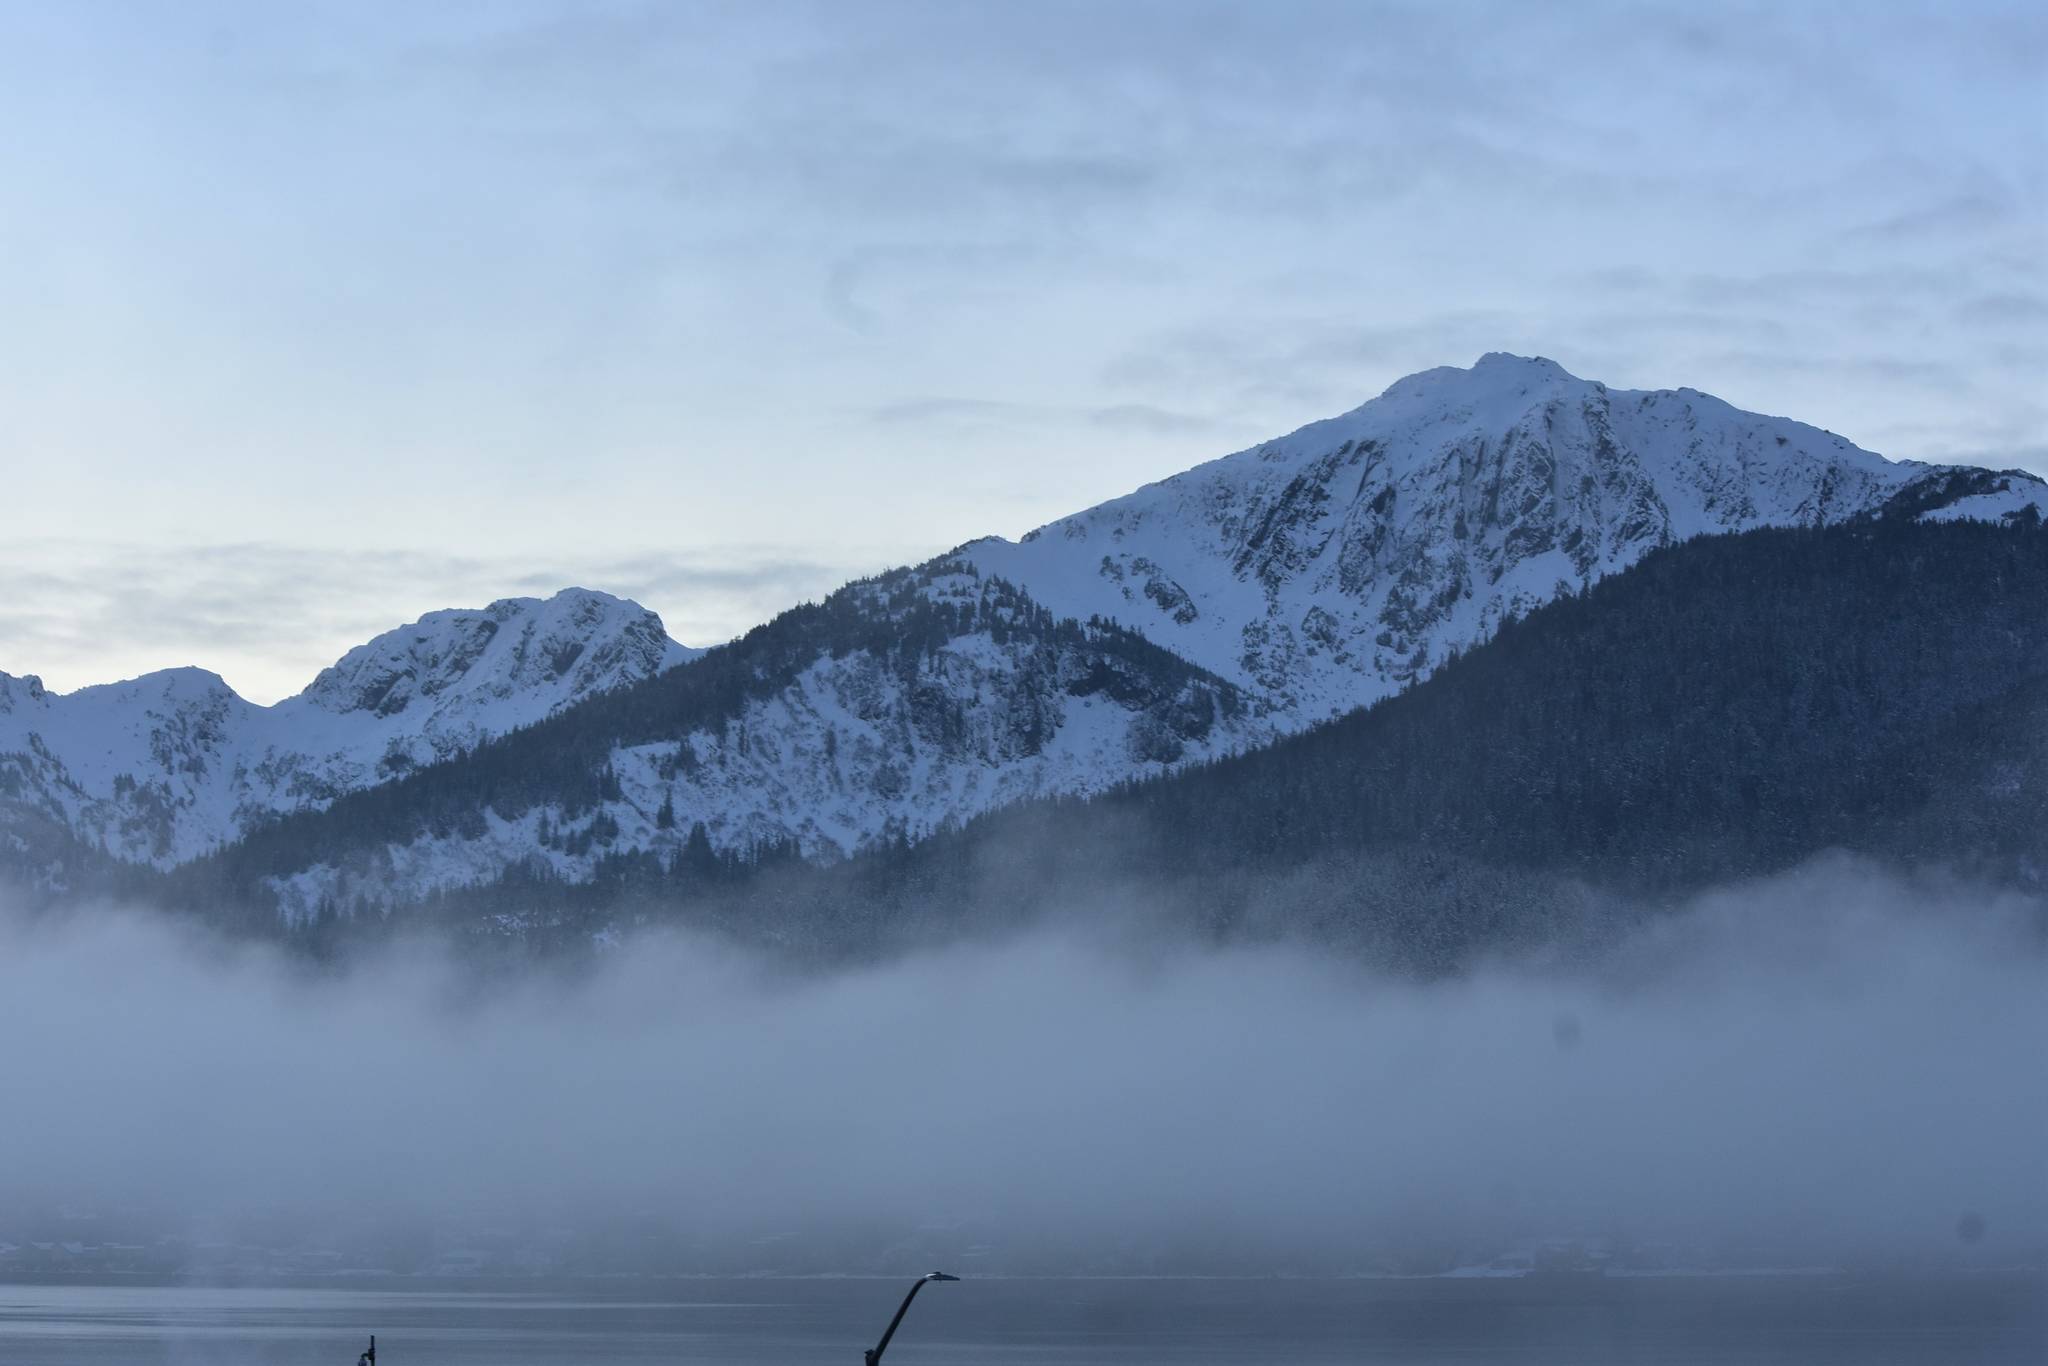 Douglas Island, part of Tongass National Forest, breaks through the fog on Dec. 15. Sealaska Corporation announced Monday they would terminate logging operations in the Tongass this year. (Peter Segall / Juneau Empire)